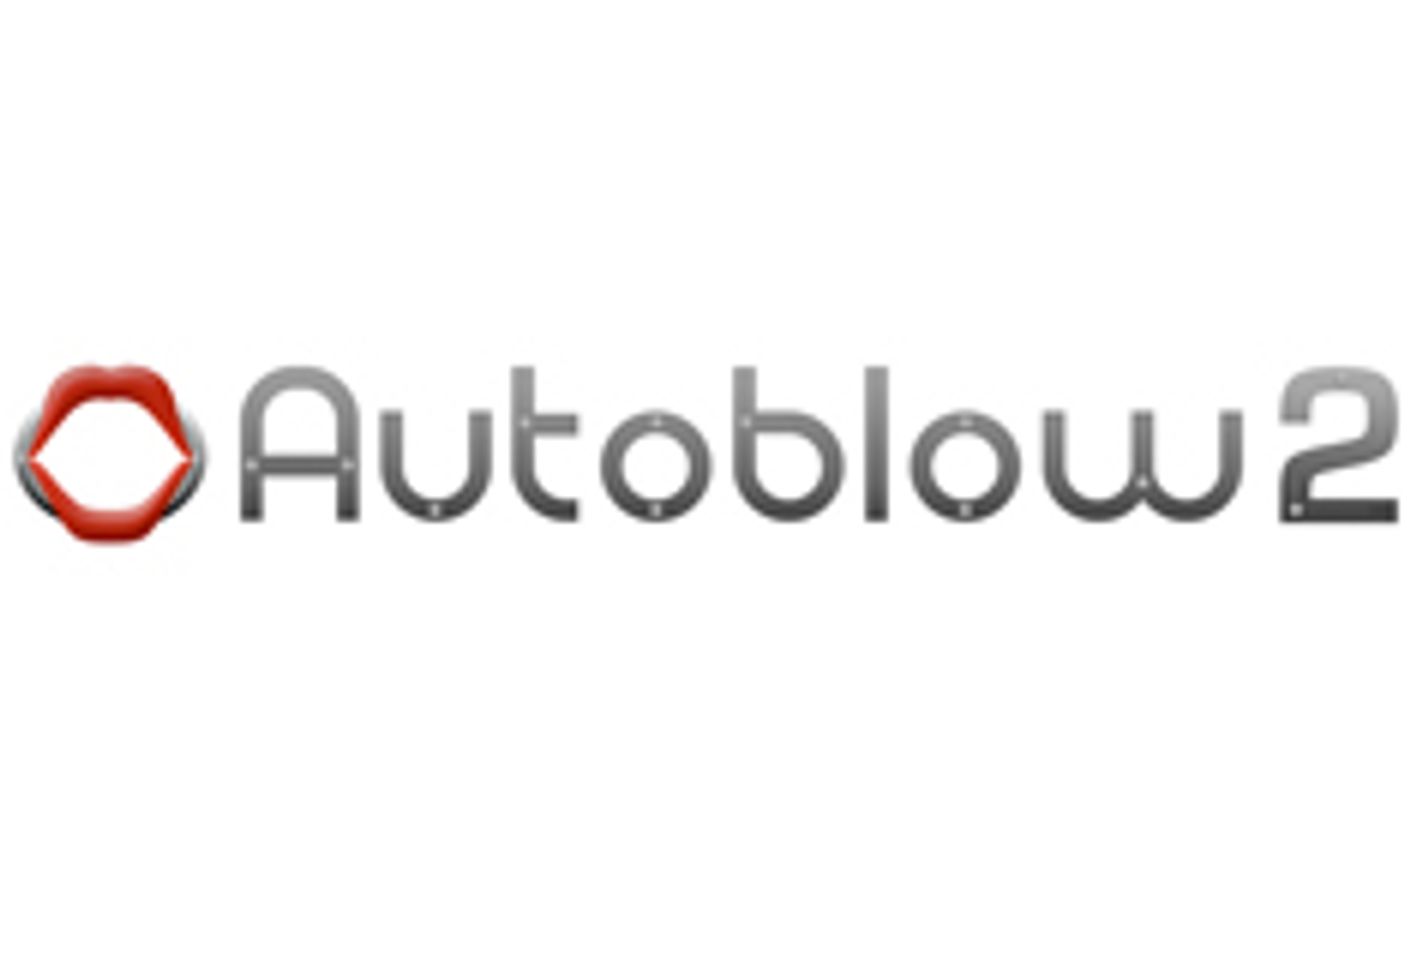 Autoblow 2 Launches In 10 European Countries In 9 Languages